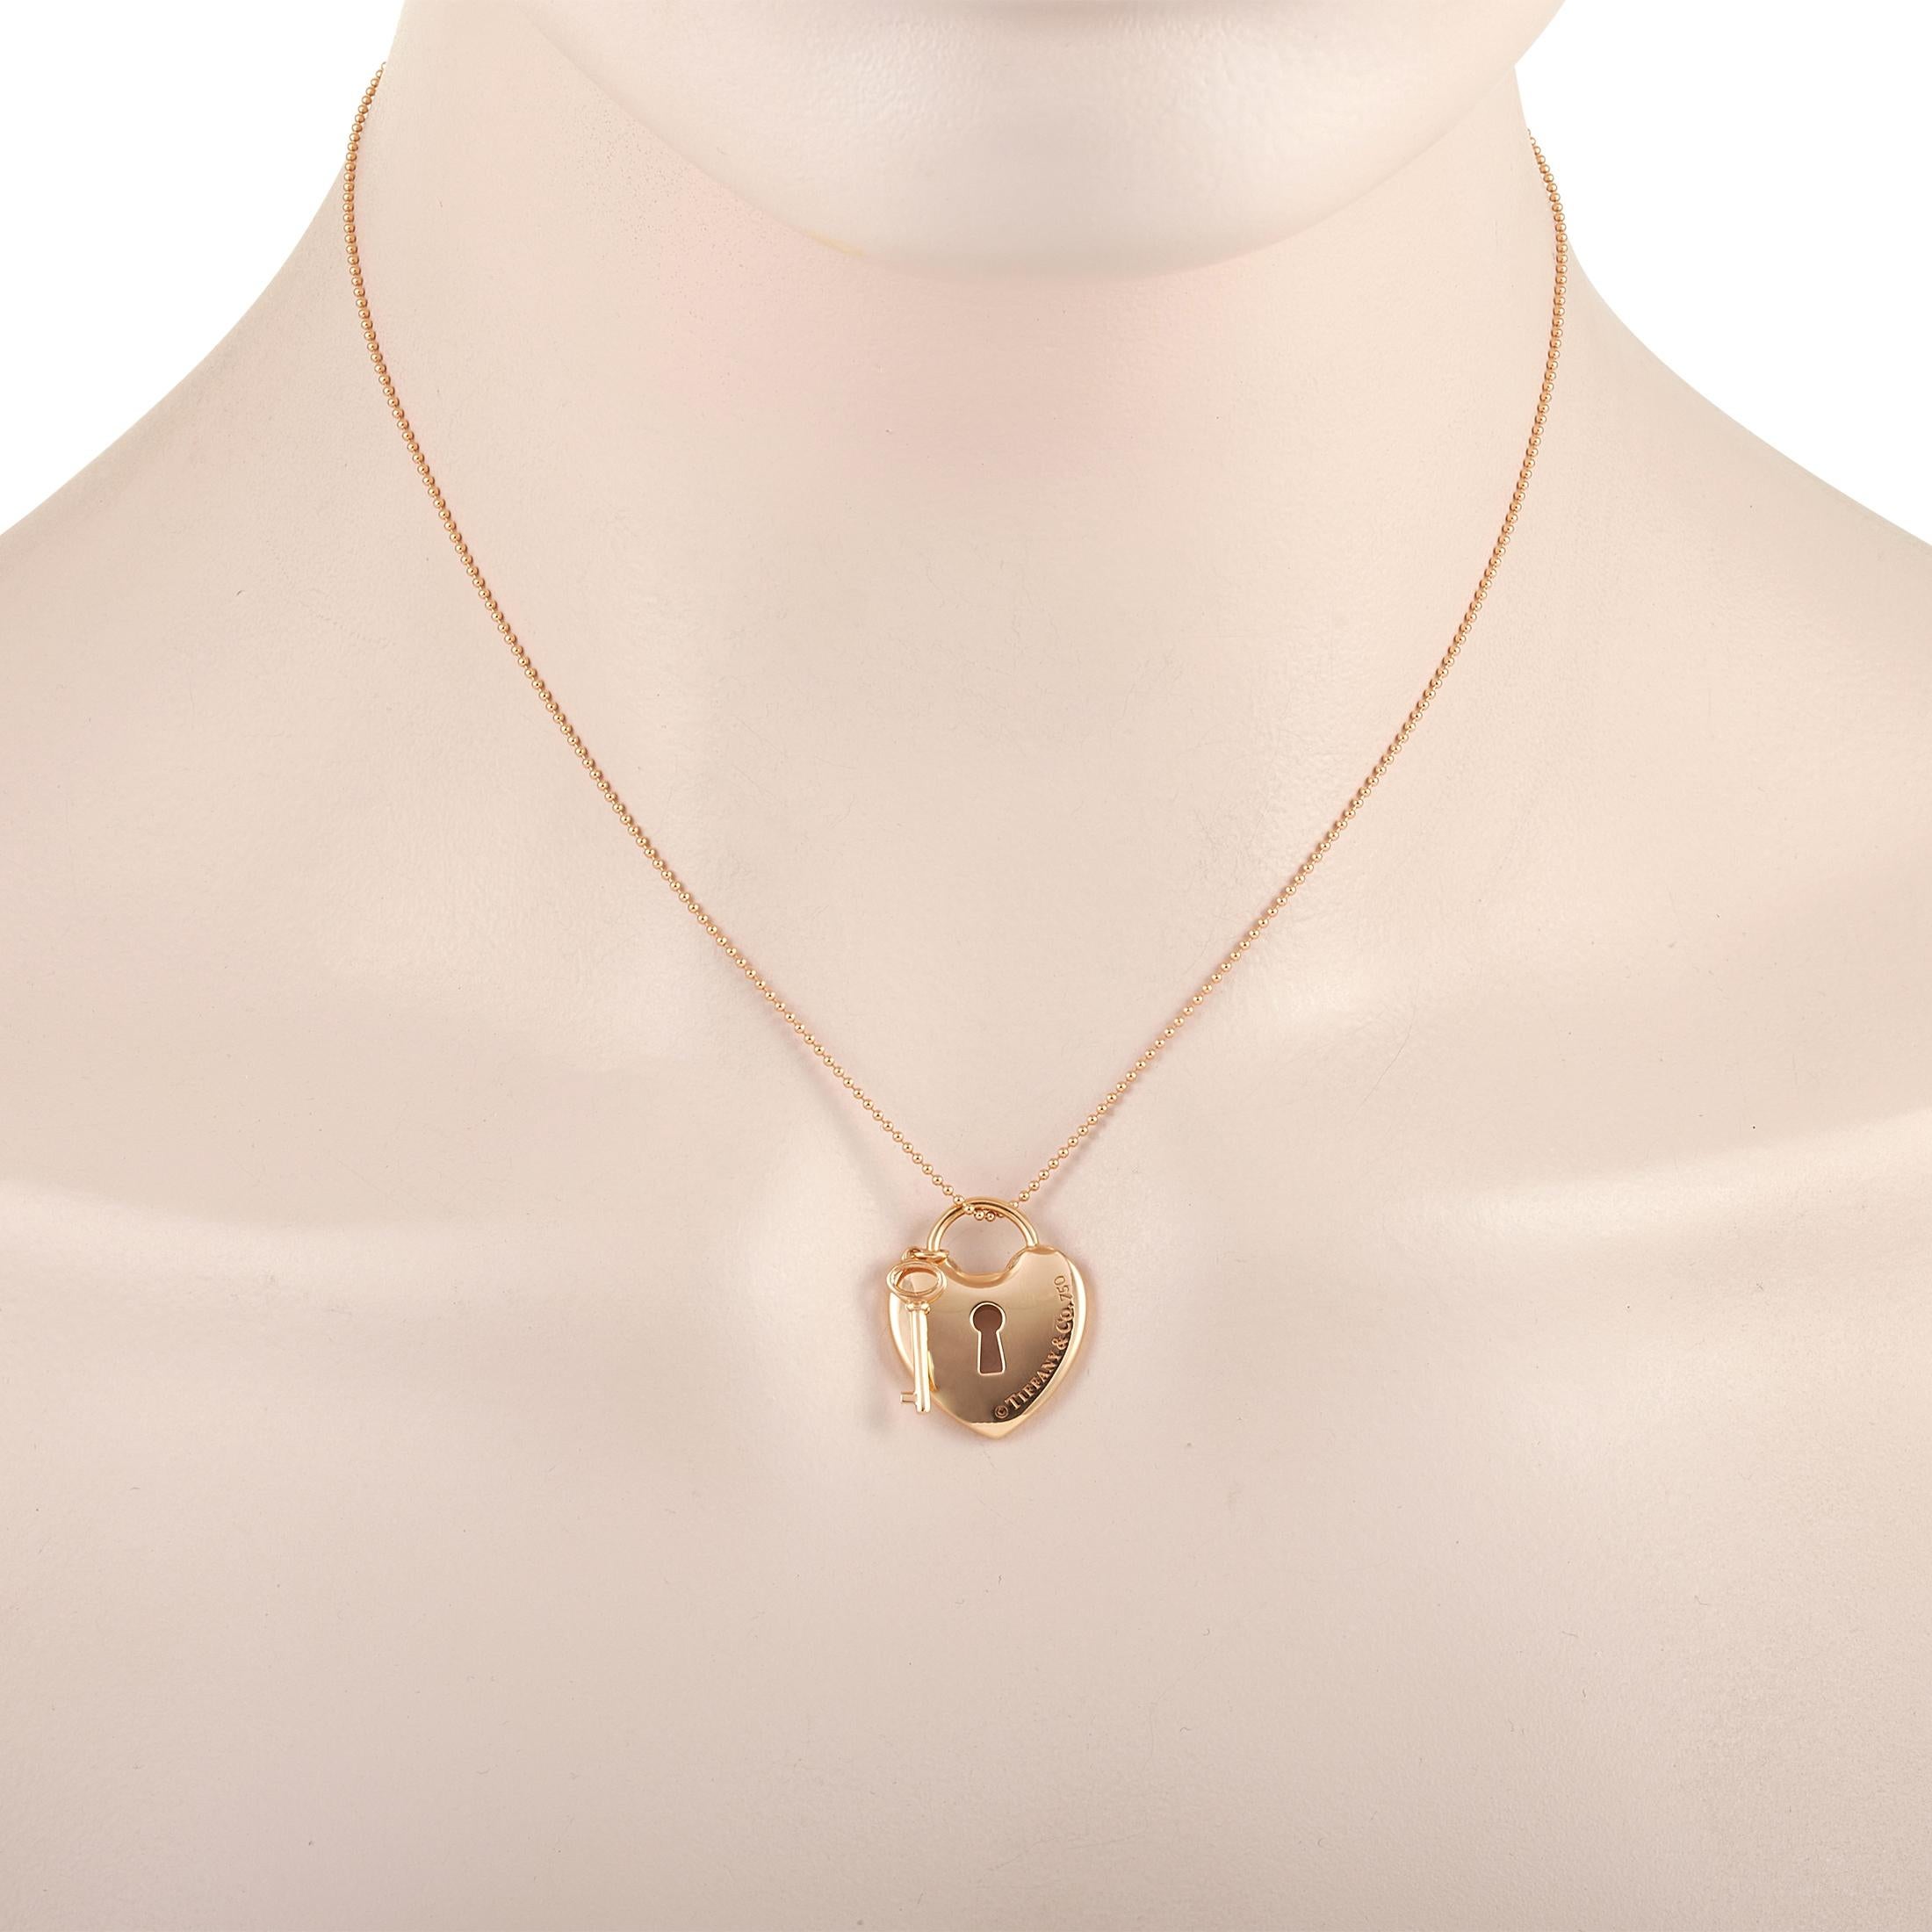 This cute Tiffany & Co. 18K Rose Gold Lock and Key Heart Pendant Necklace is made with an 18K rose gold chain and features a rose gold padlock-shaped pendant and matching key. The padlock is engraved with the Tiffany & Co. brand name. The dainty 18K